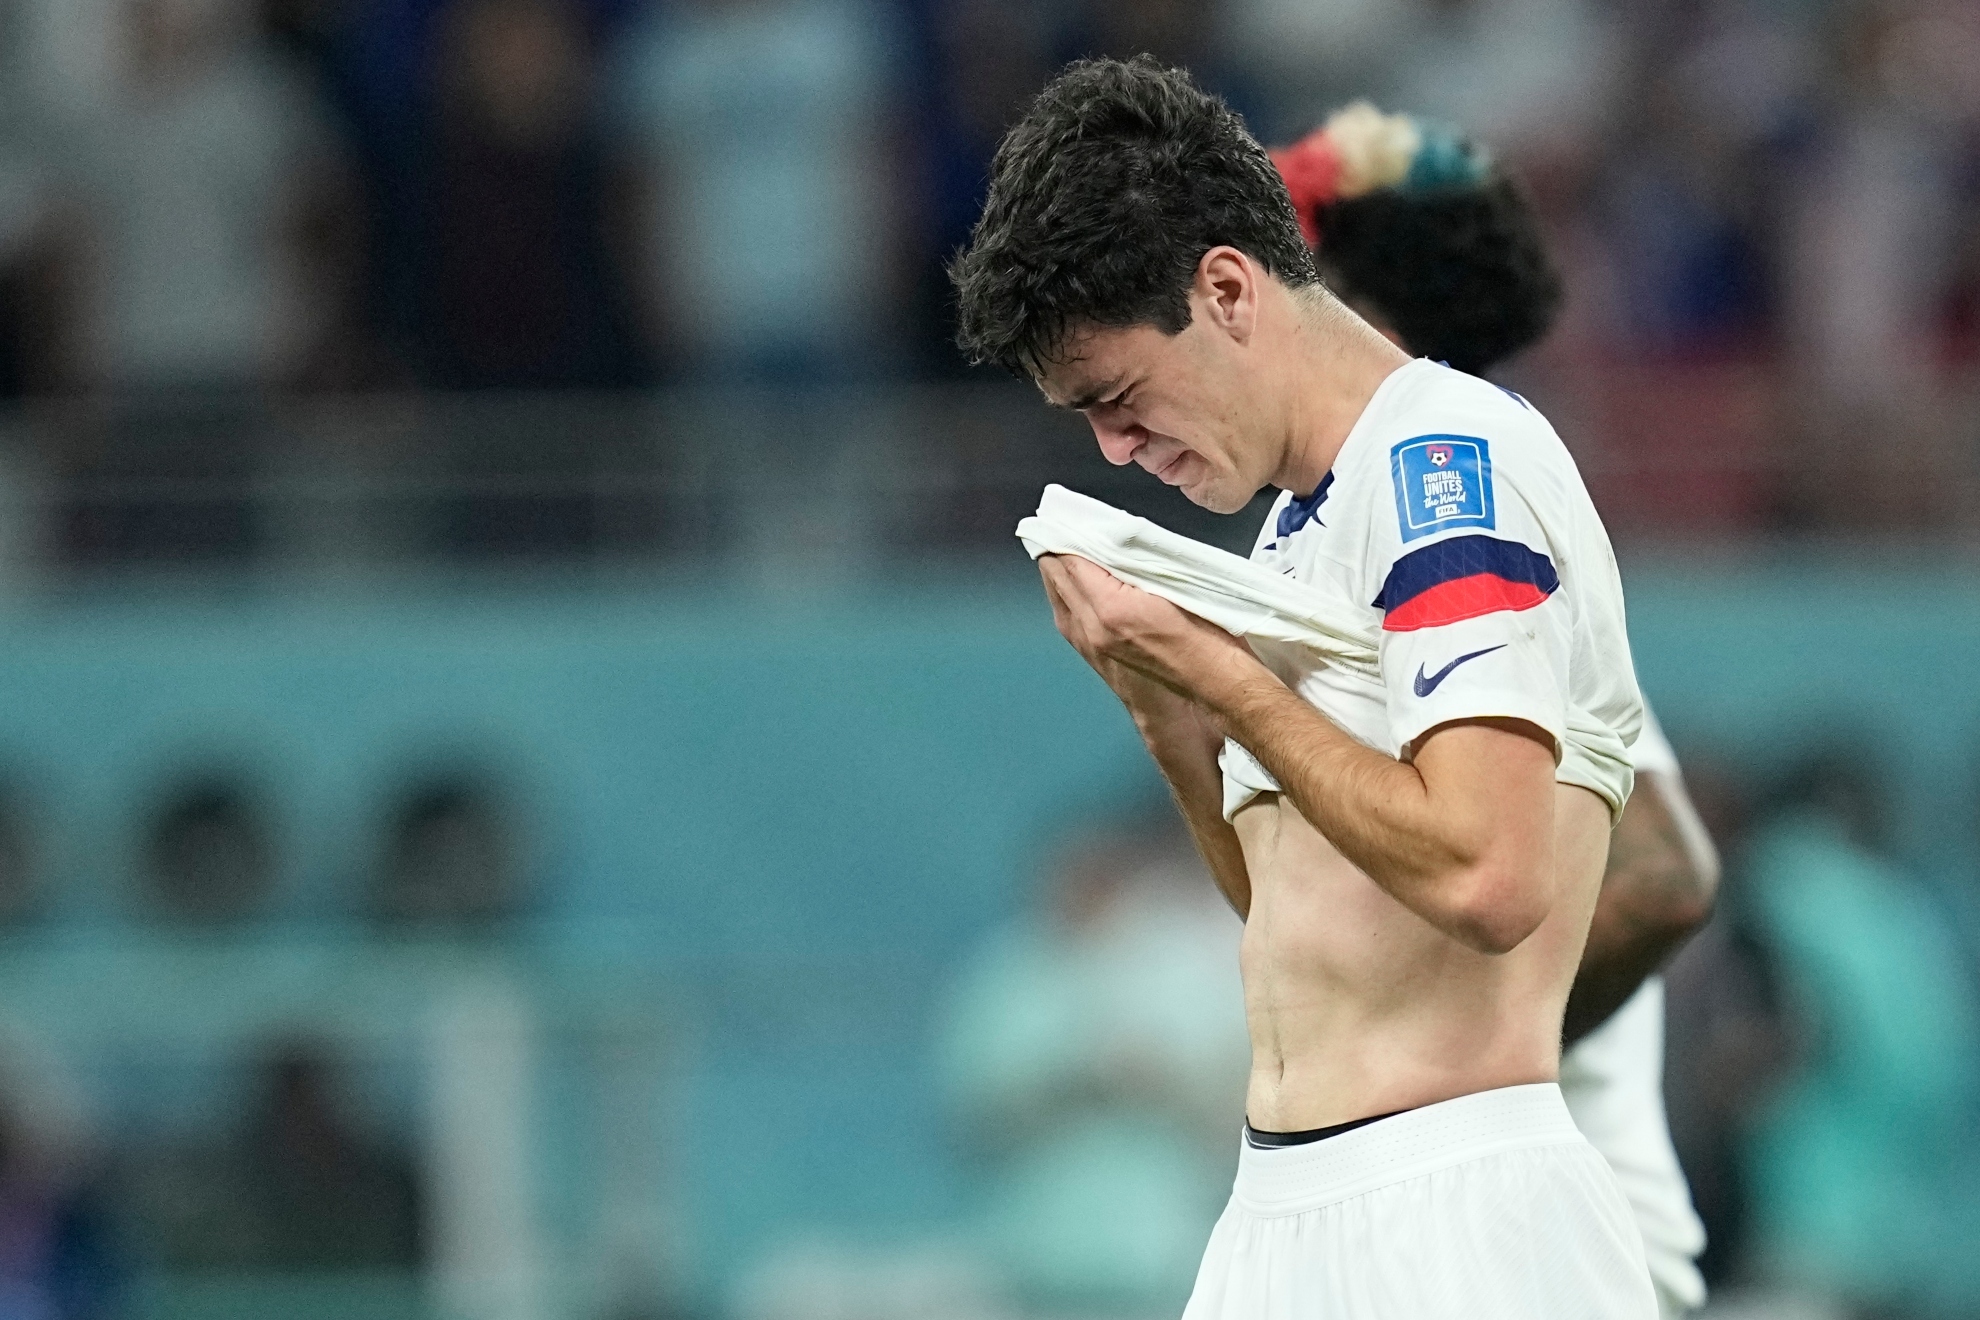 Gio Reyna of the United States is dejected after the World Cup round of 16 soccer match between the Netherlands and the United States